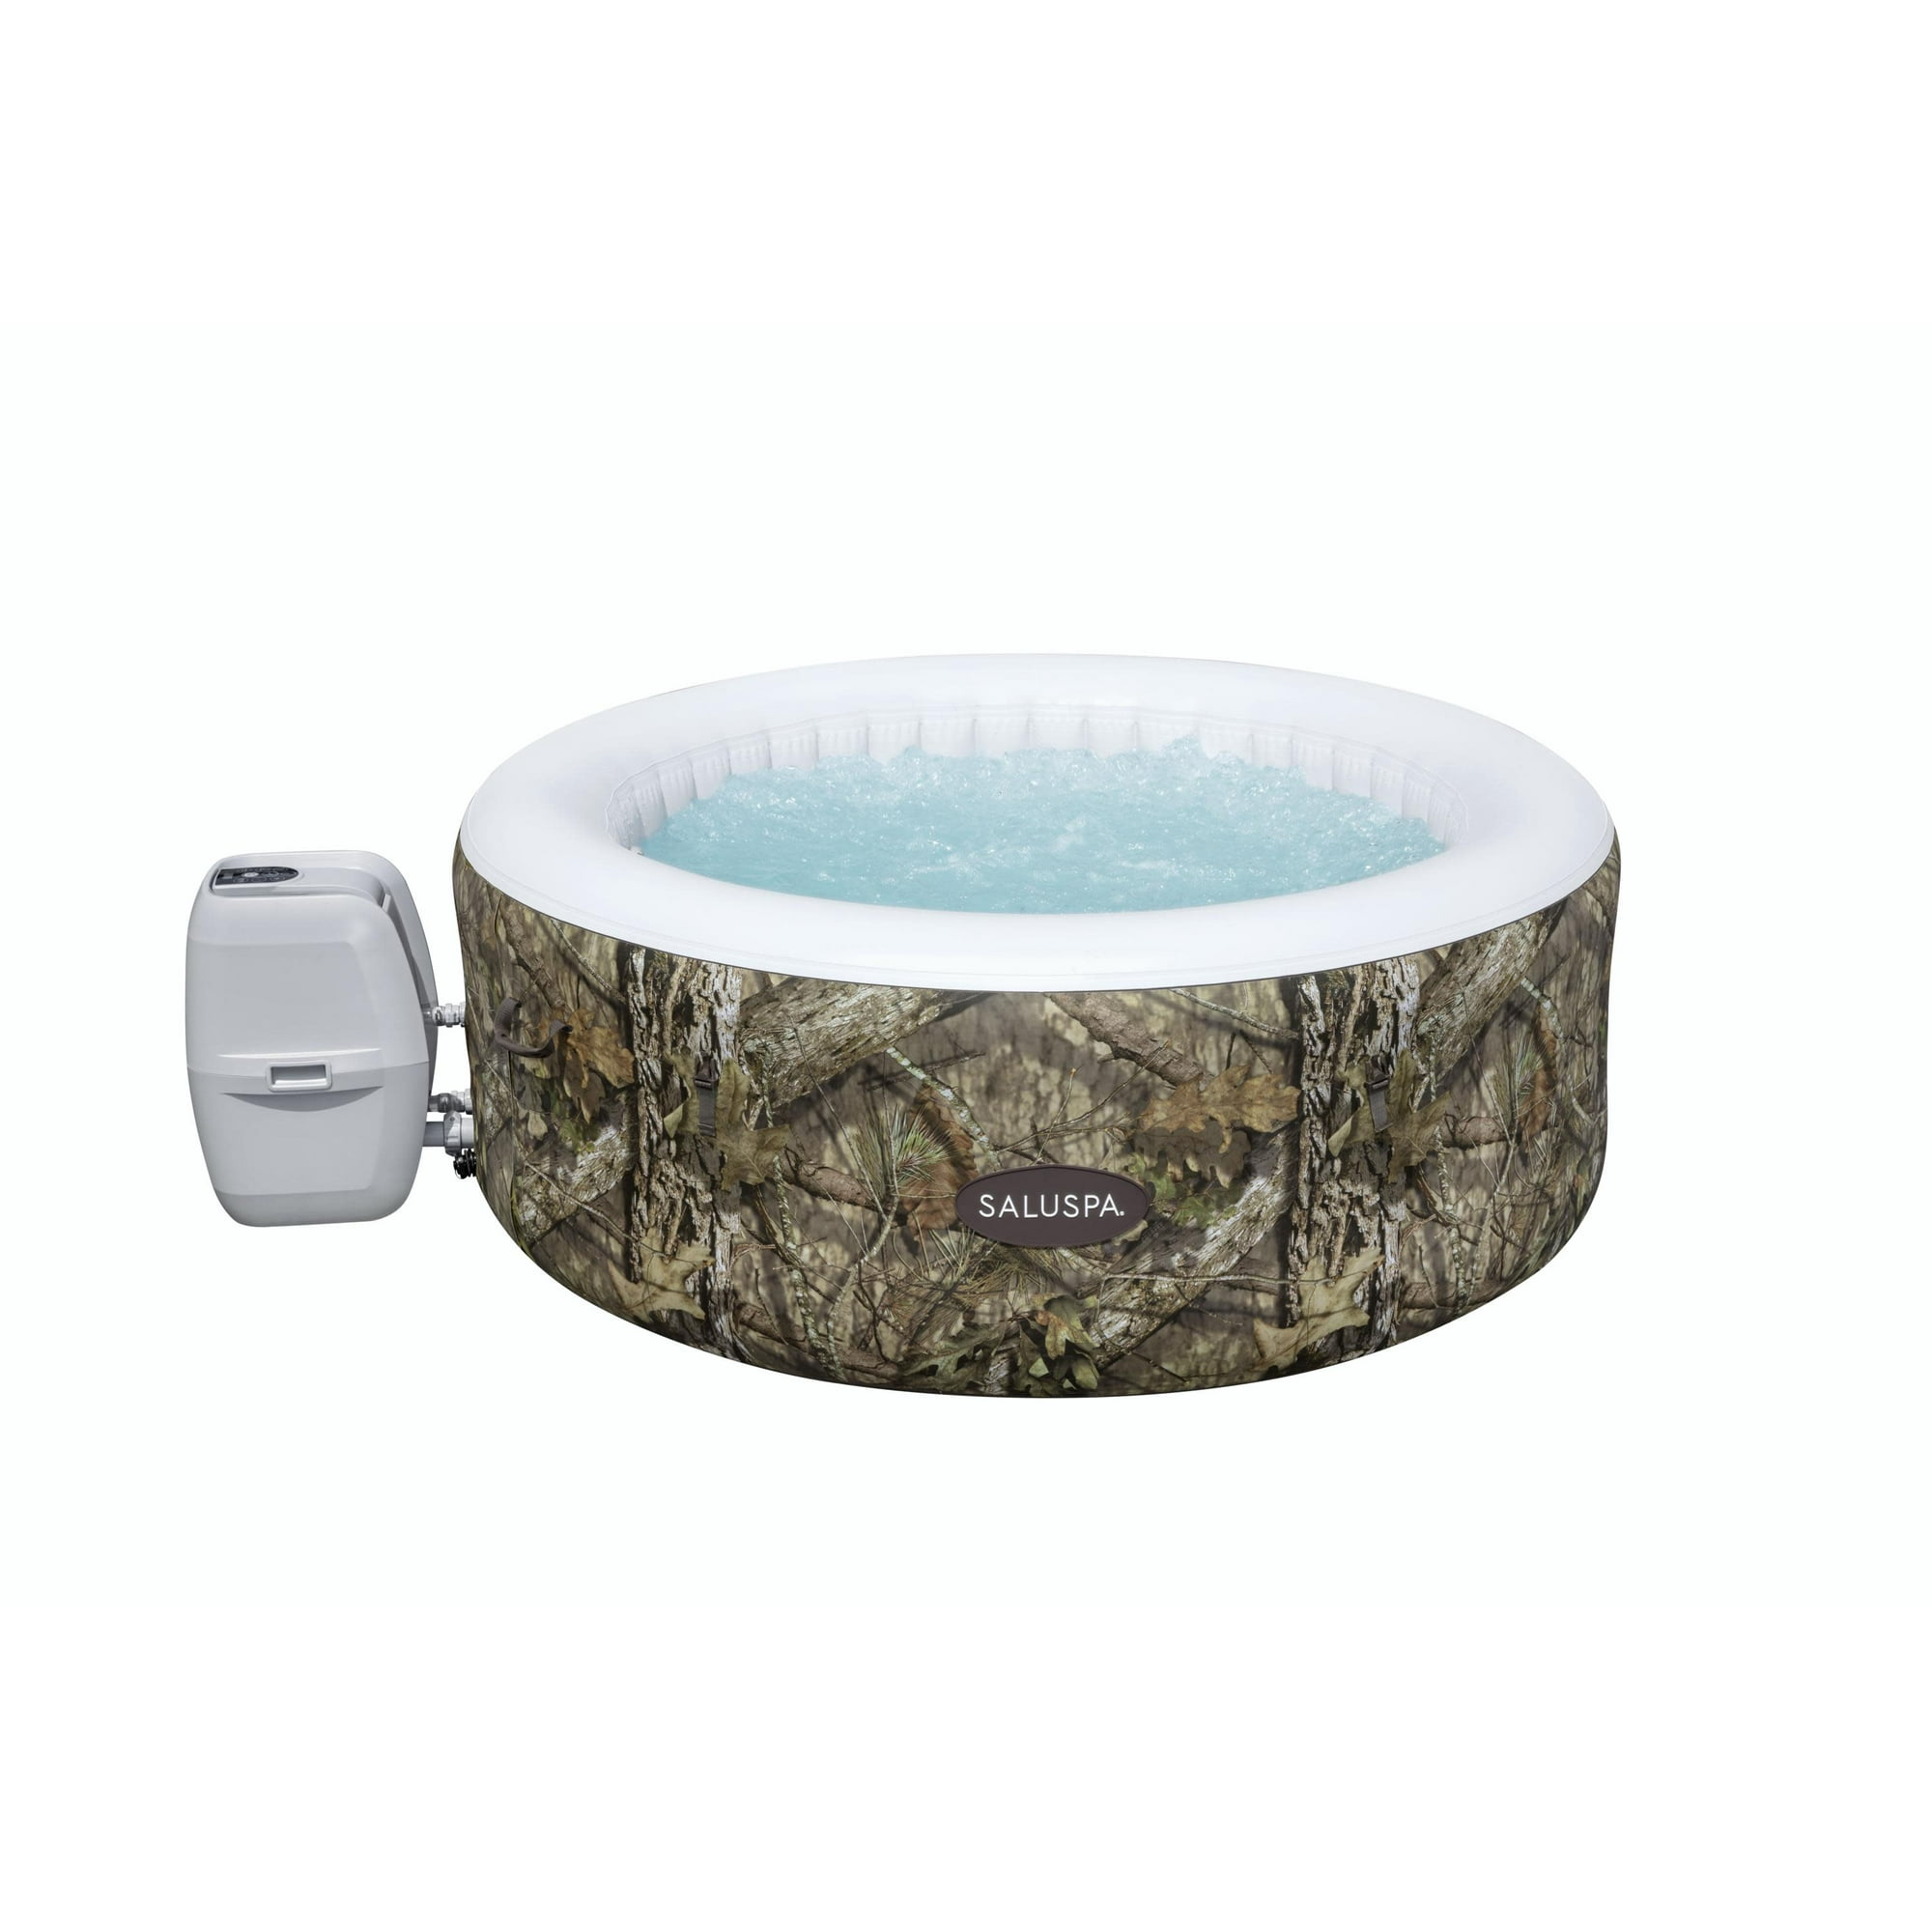 SaluSpa Mossy Oak 2-4 Person Outdoor Inflatable Hot Tub Spa